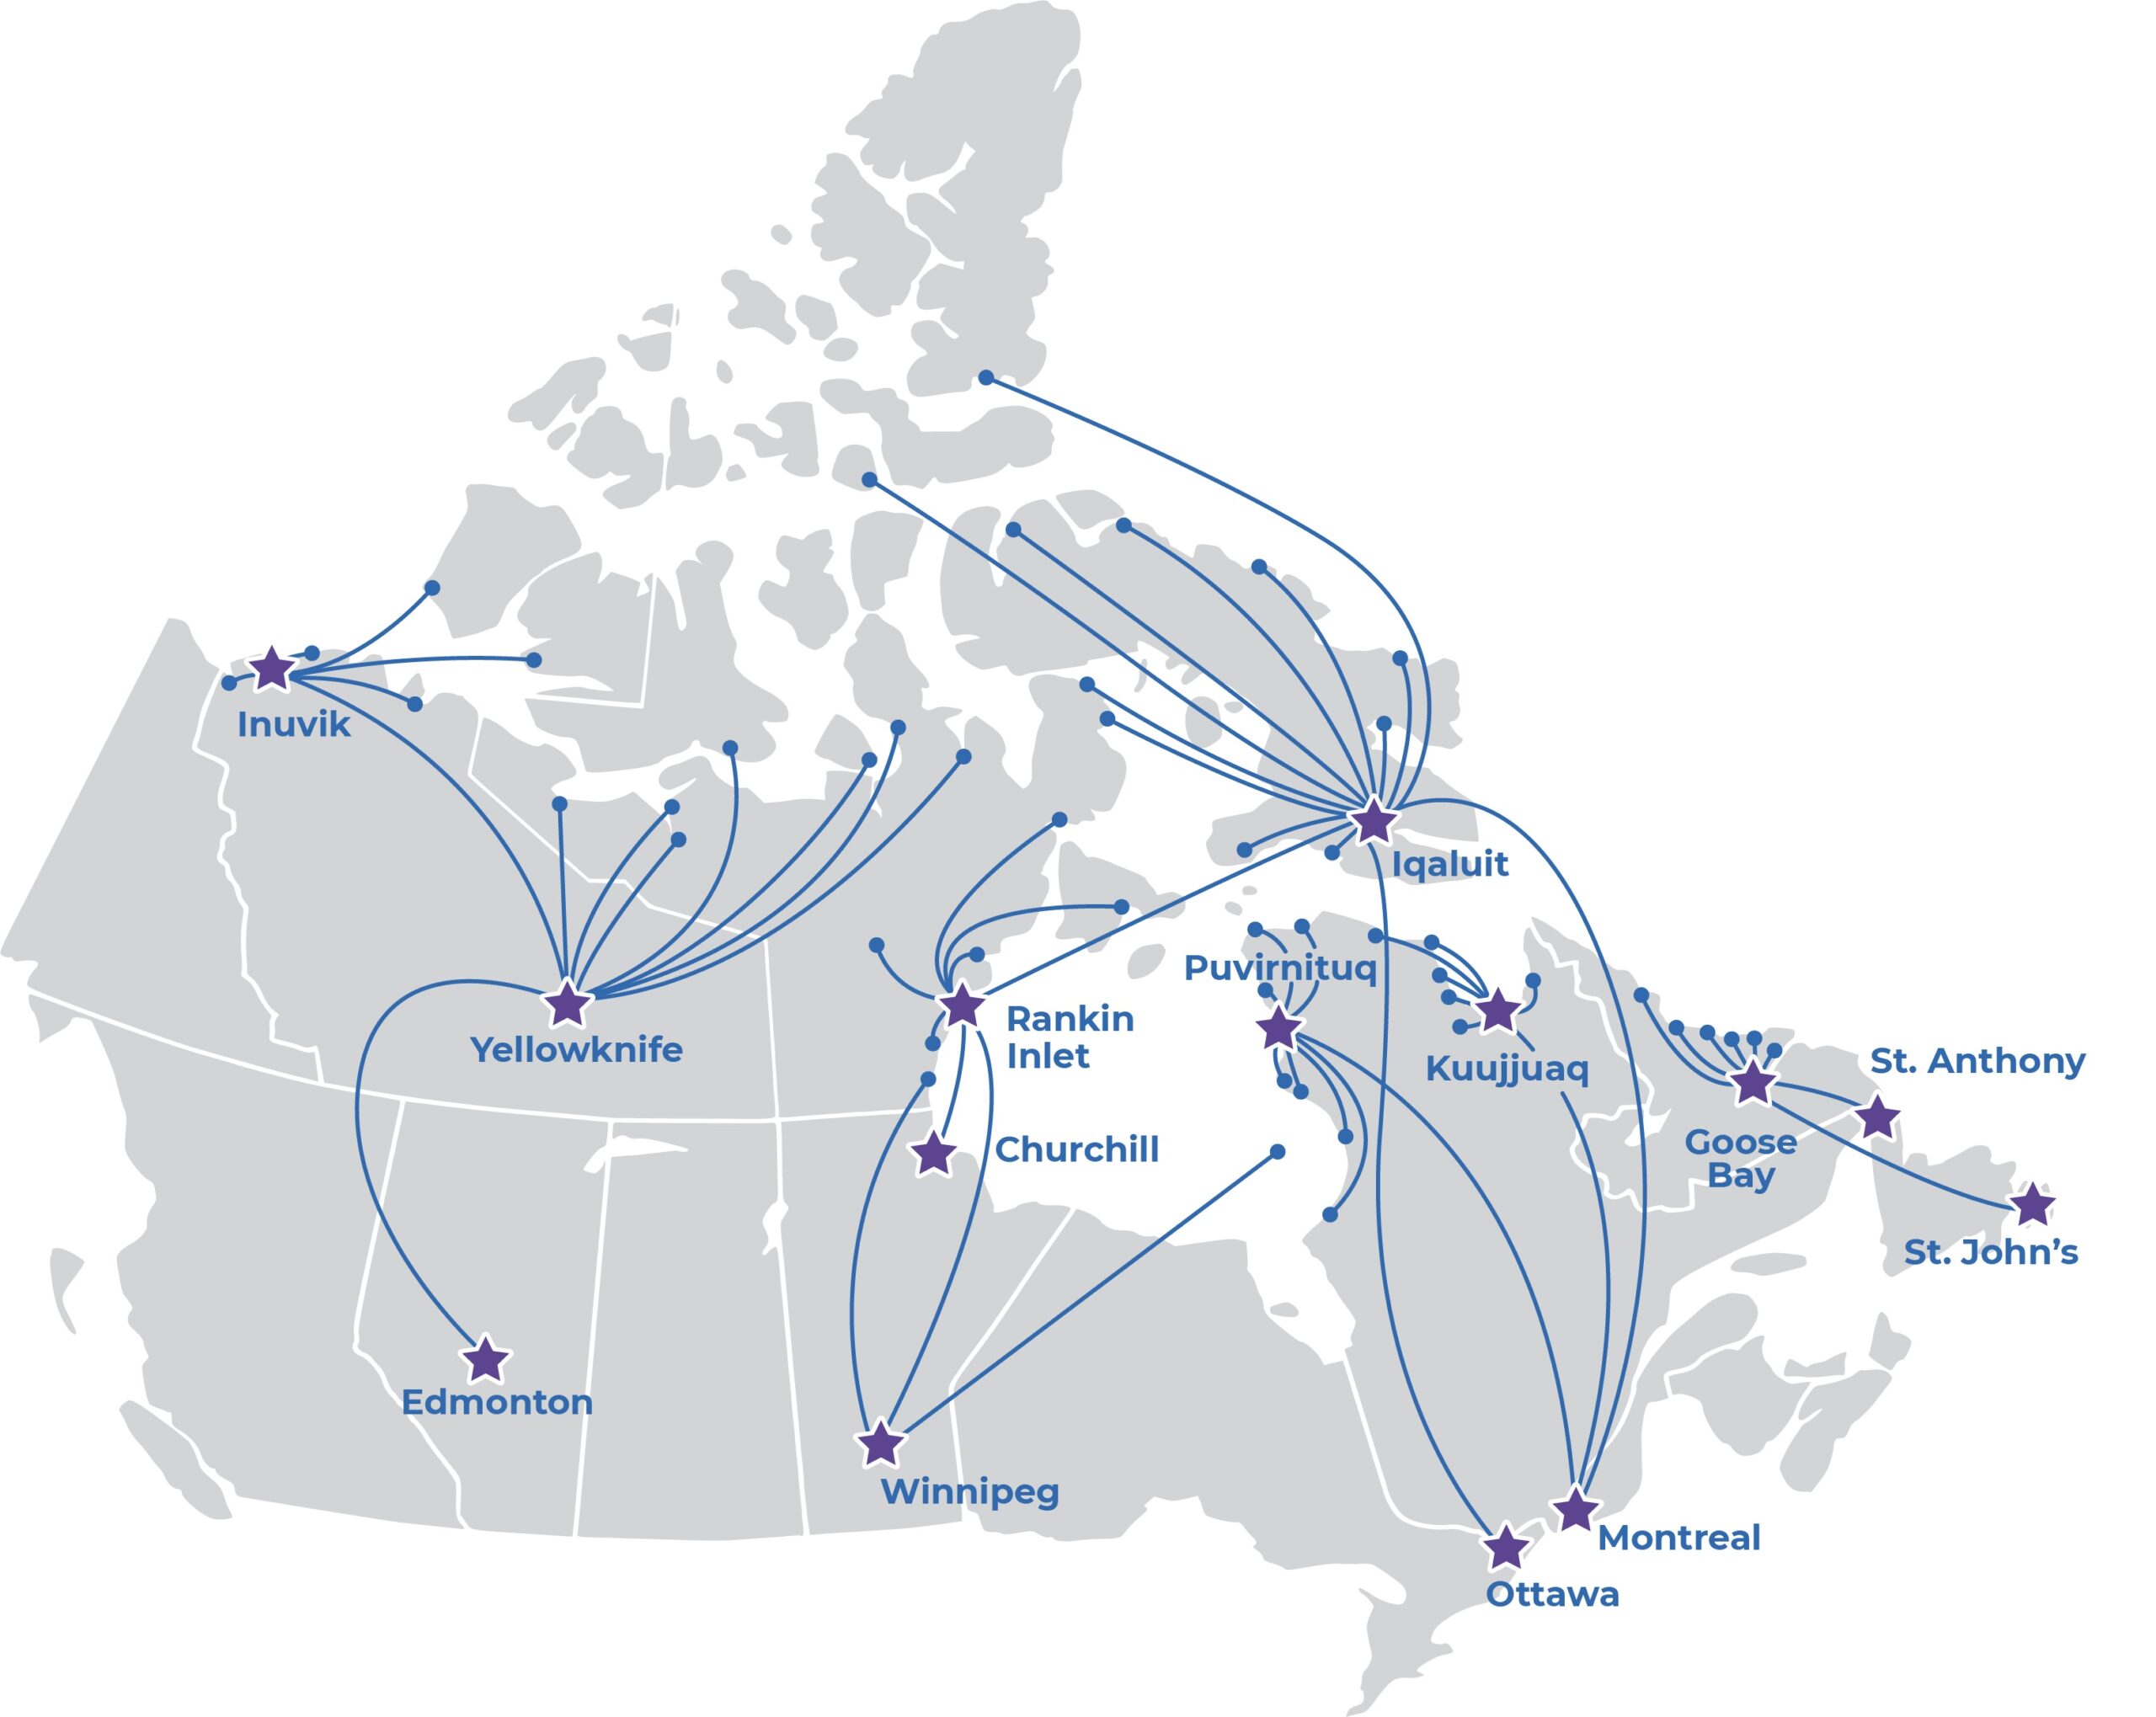 map of Canada showing travel from the north down to the south to Edmonton, Winnipeg, Ottawa, Montreal and St. John's